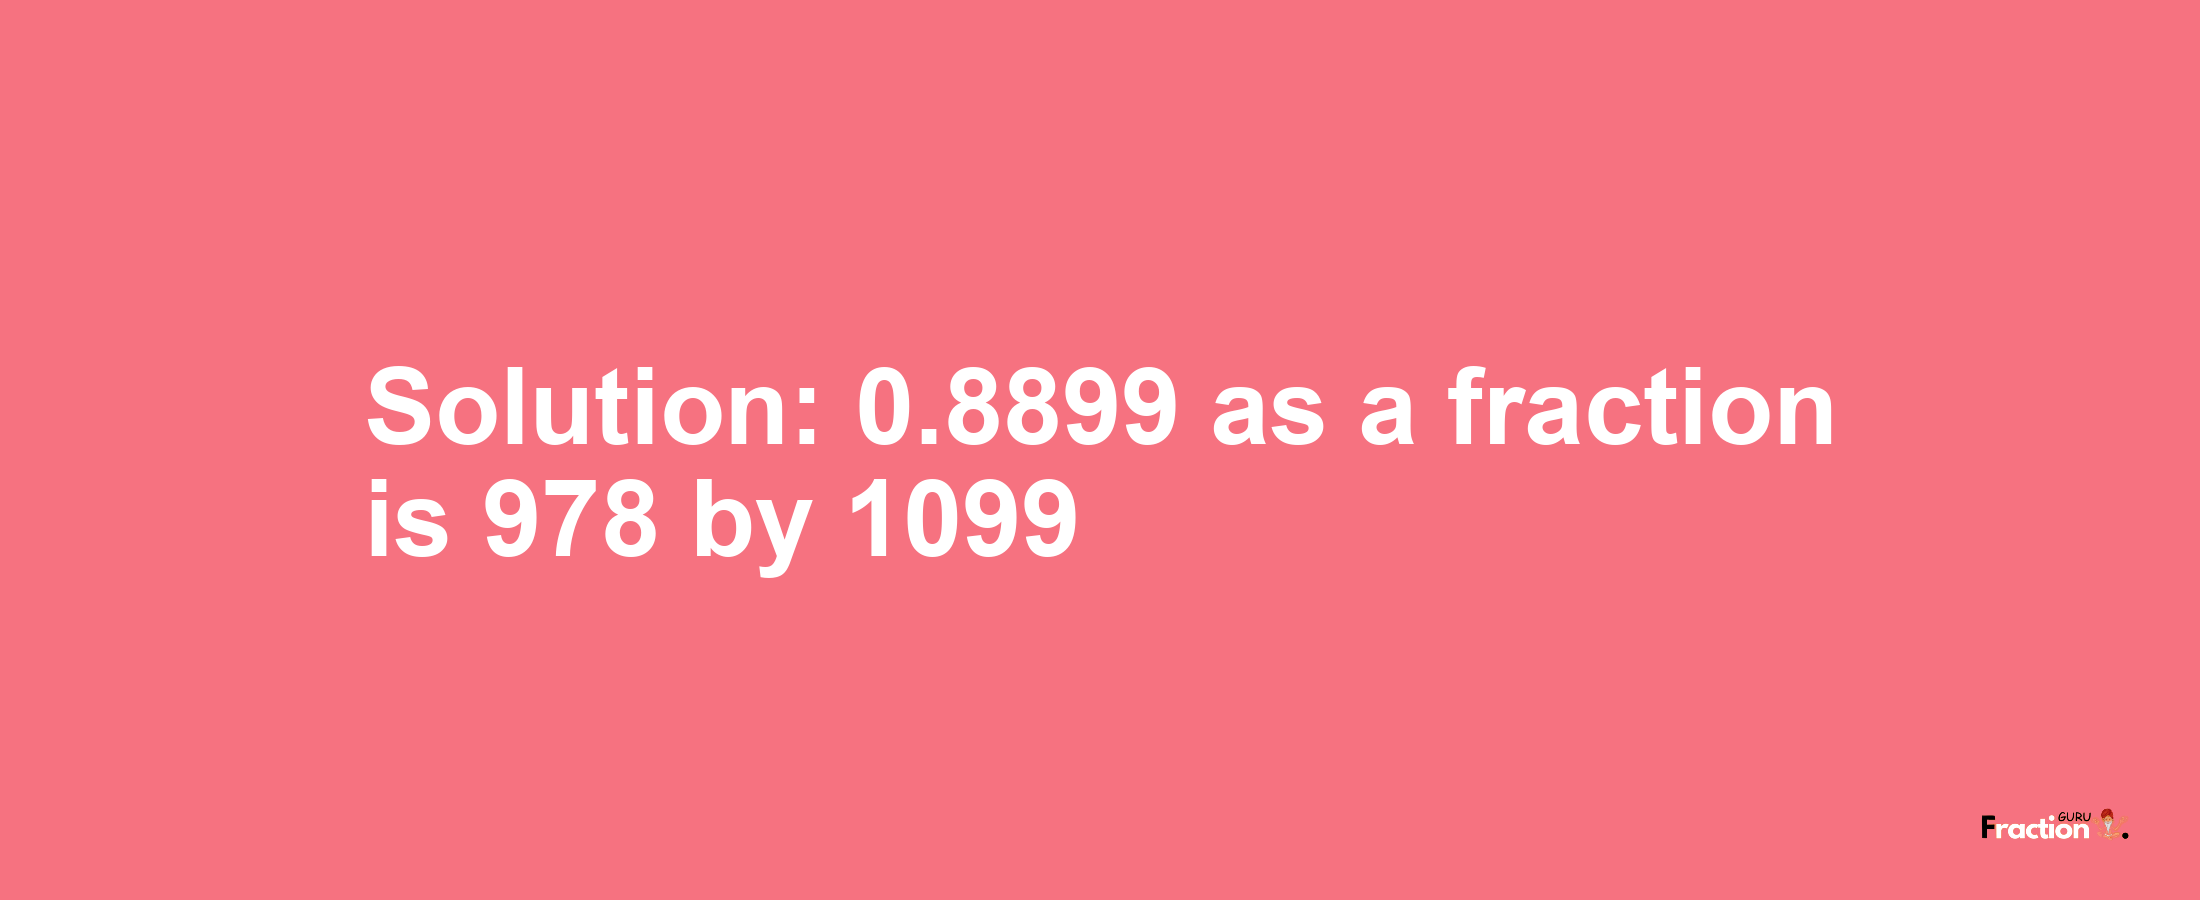 Solution:0.8899 as a fraction is 978/1099